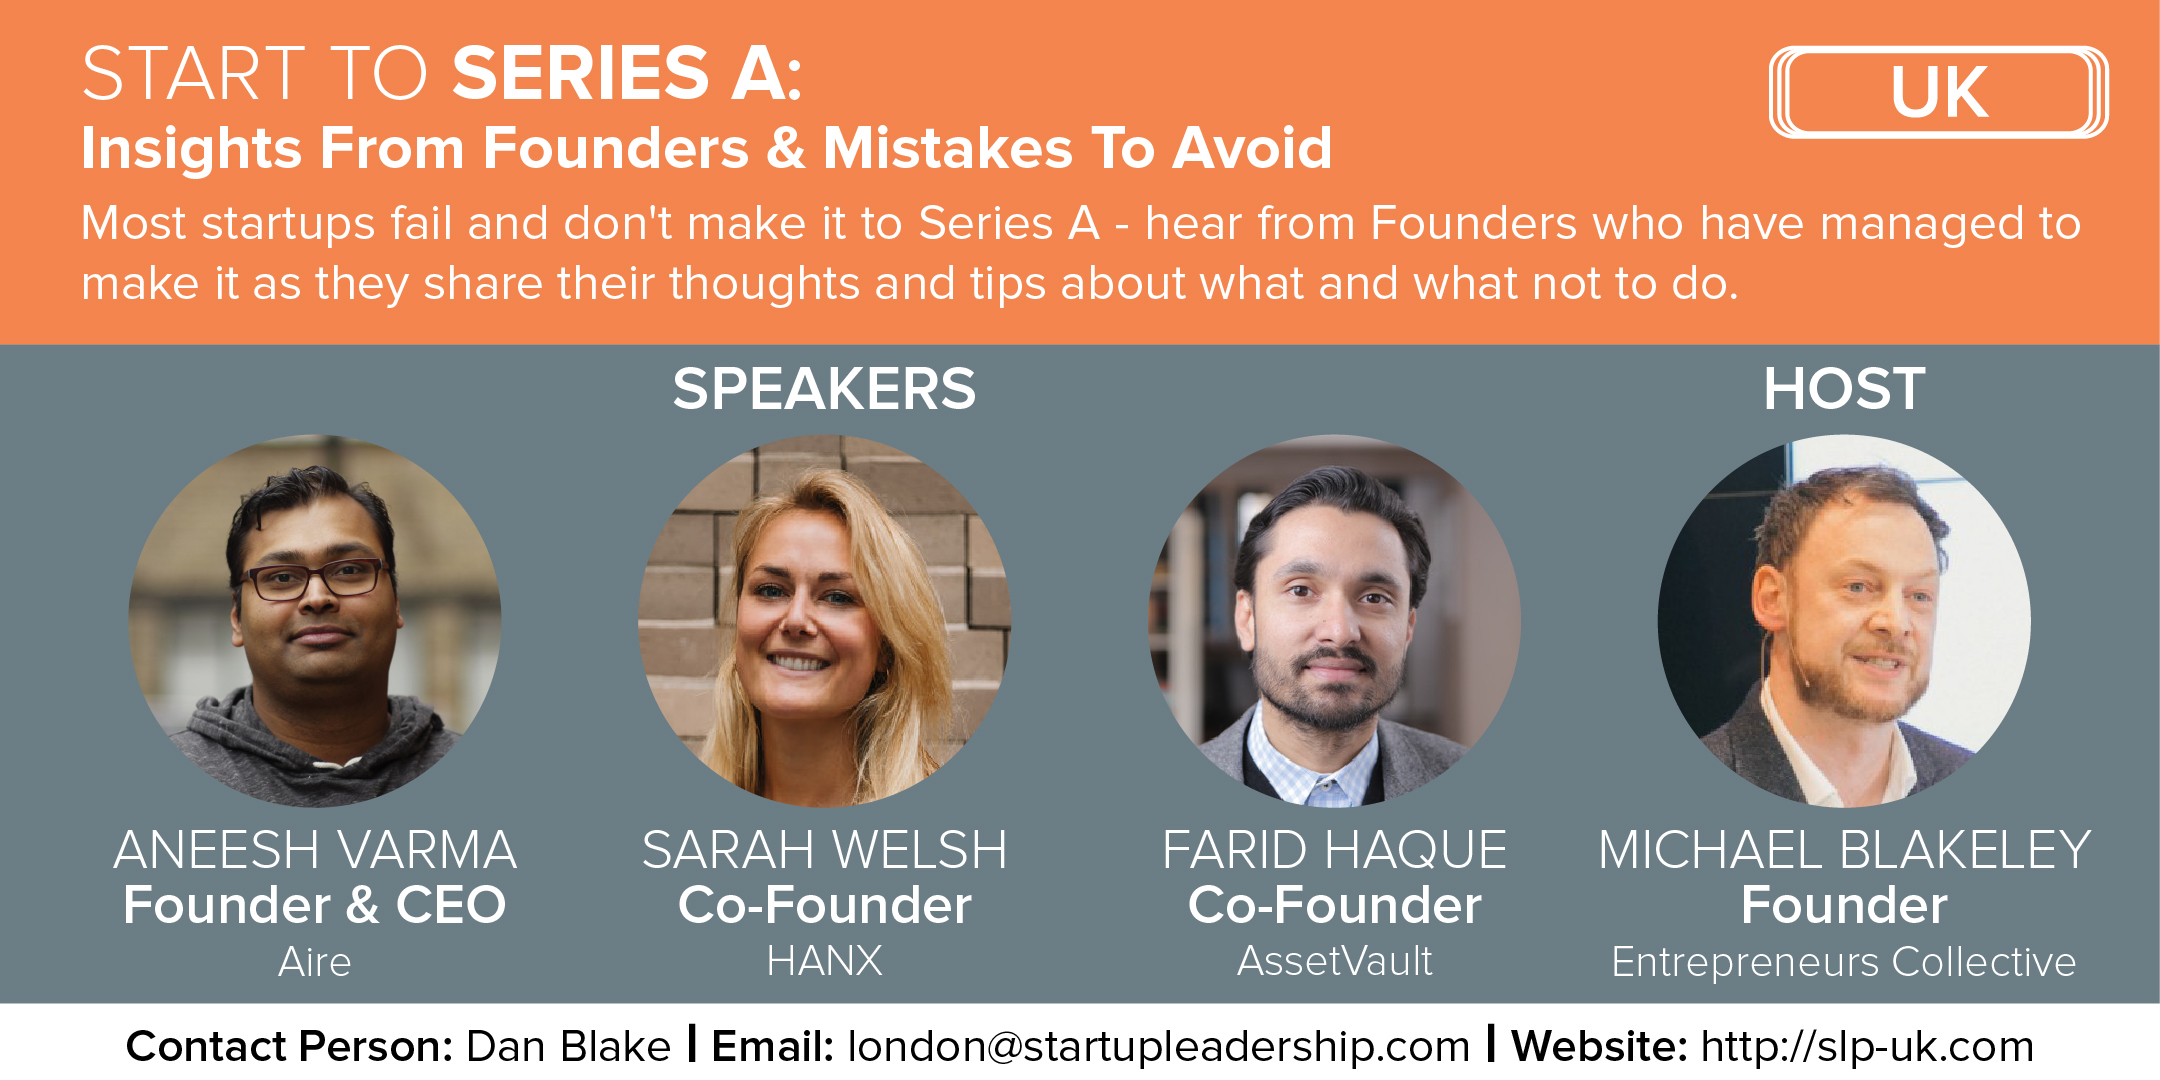 Start to Series A: Insights from Founders & The Mistakes to Avoid, London, United Kingdom